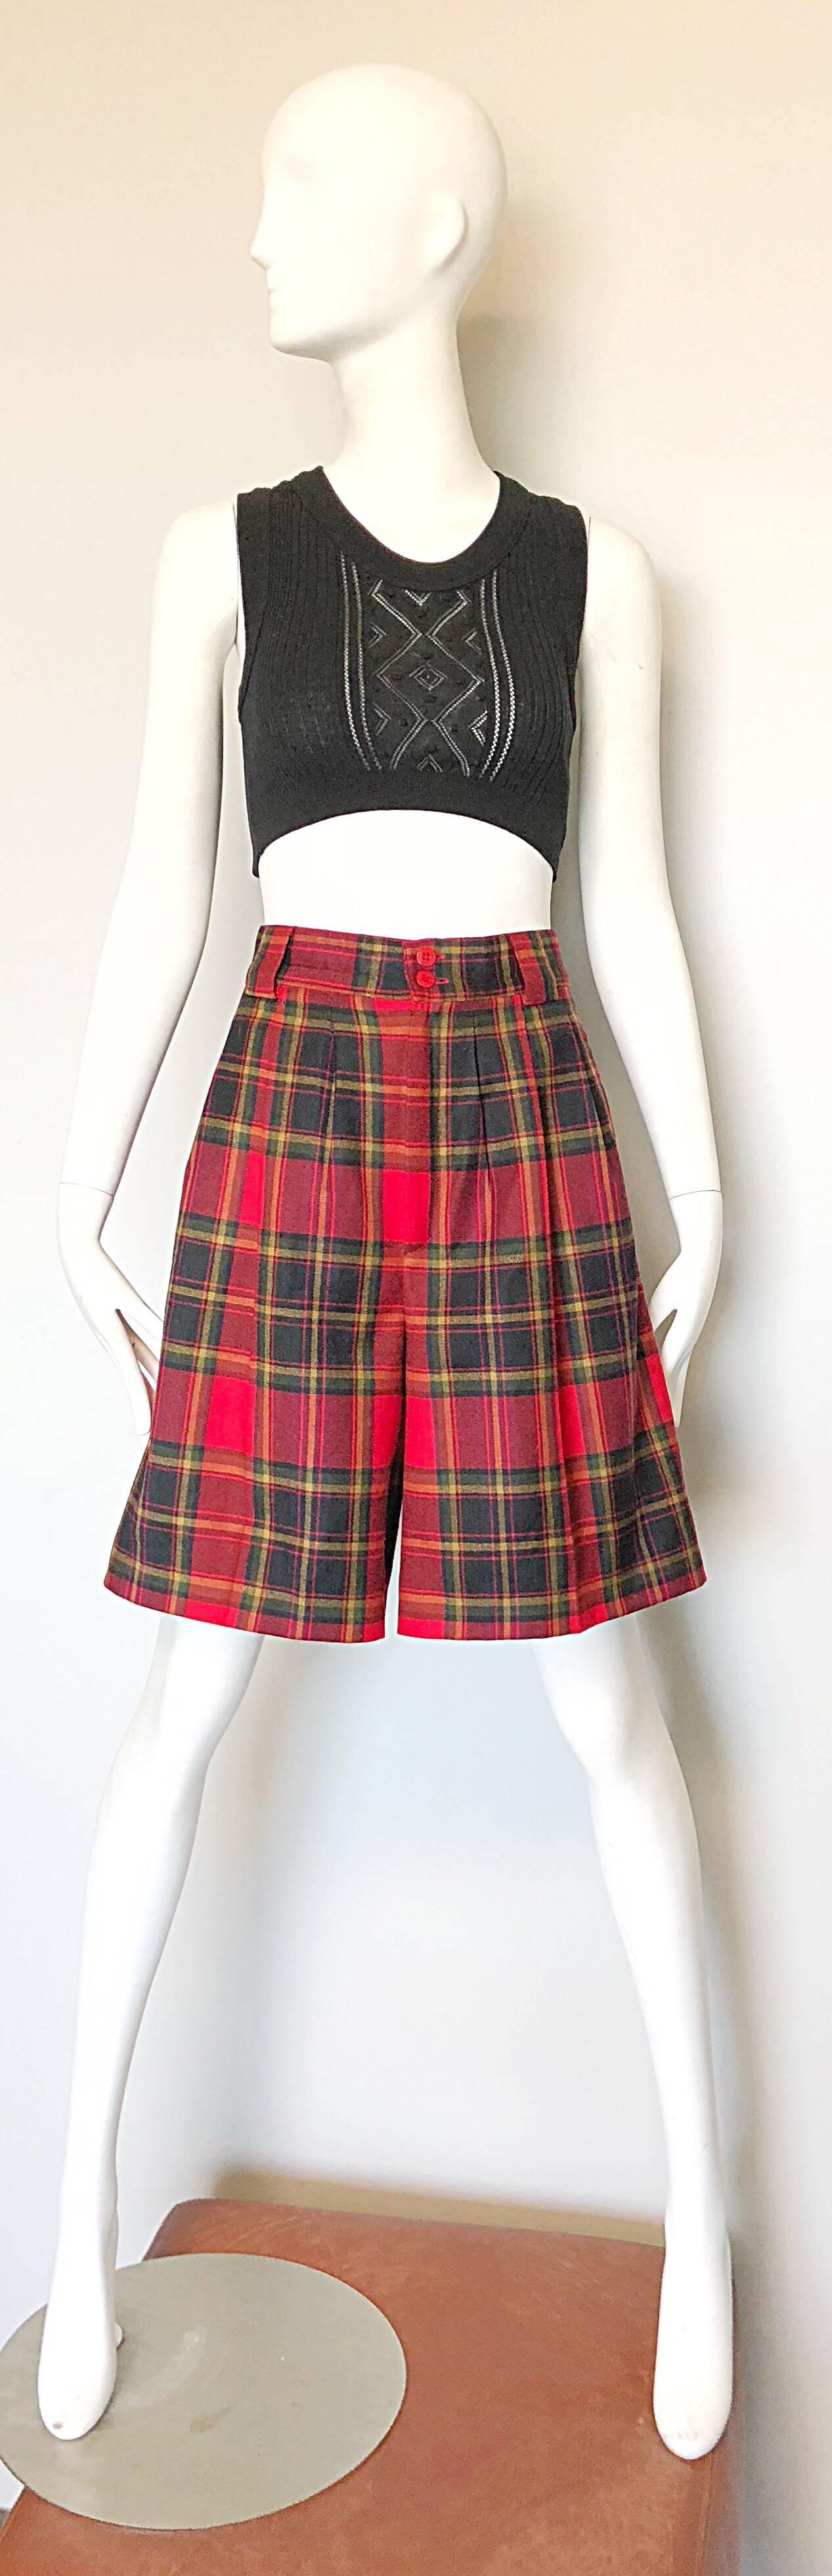 Chic 80s GIROGIO di SANT ANGELO red tartan plaid high waisted wide leg culottes / shorts! Features pleats at the waist, with zipper fly and double button closure. Pockets at each side of the waist and on the rear. Can easily be dressed up or down.